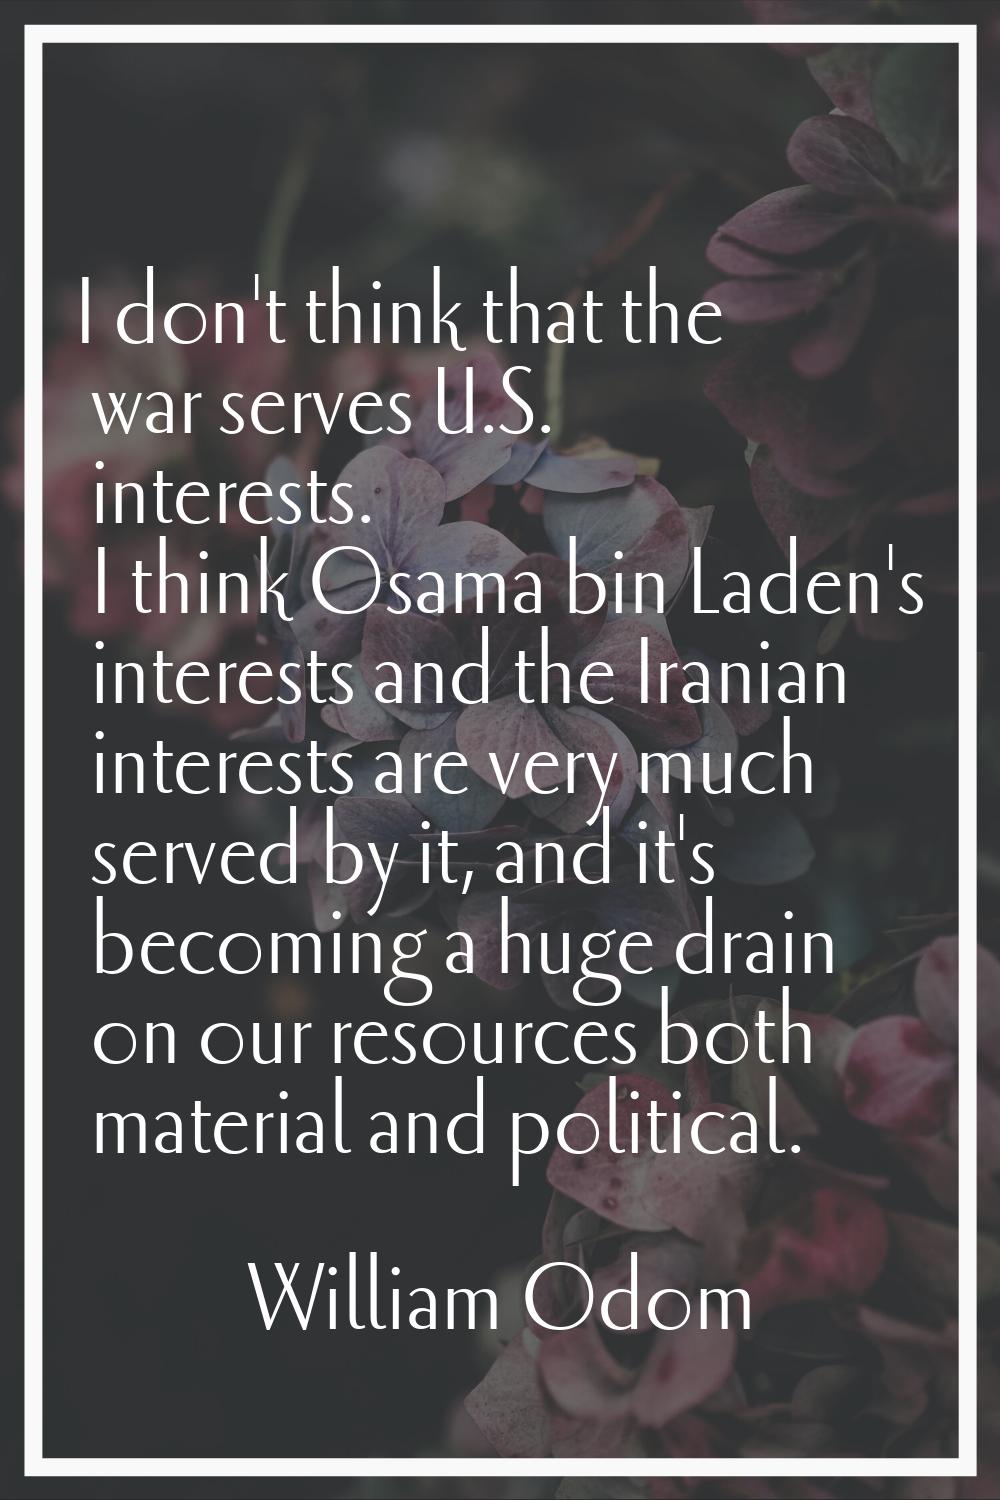 I don't think that the war serves U.S. interests. I think Osama bin Laden's interests and the Irani